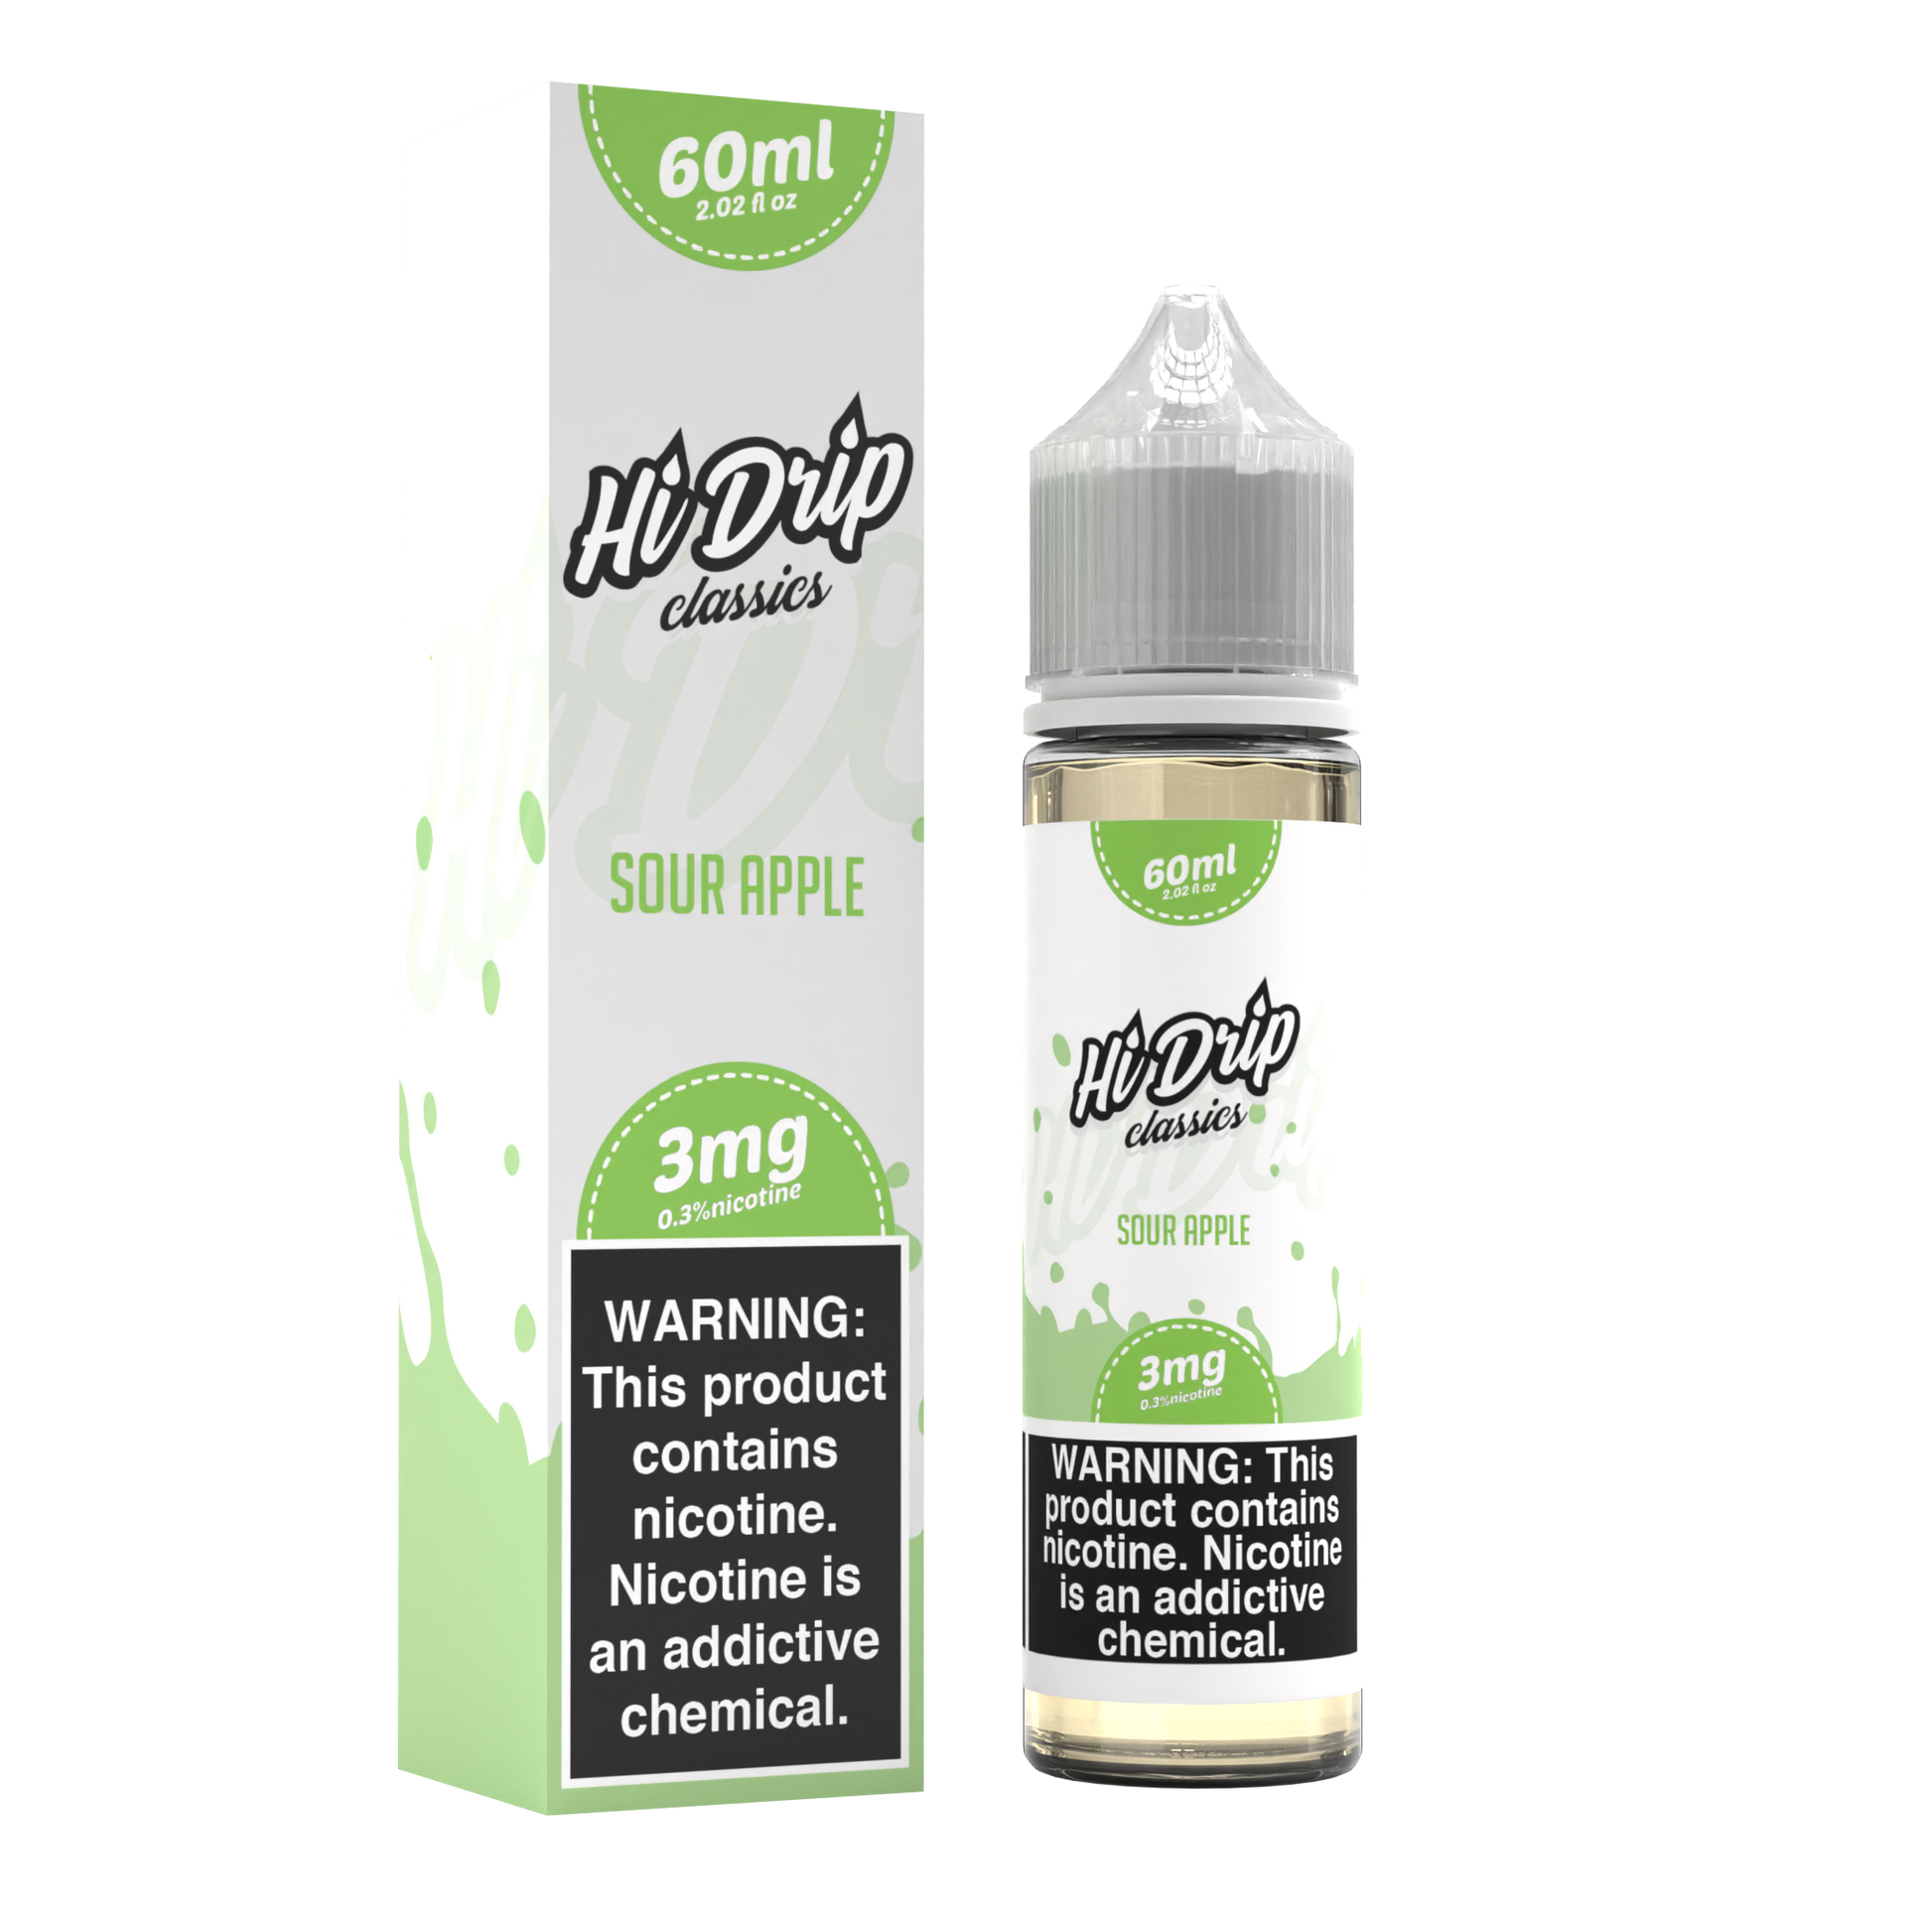 Sour Apple by Hi-Drip Classics Series 60mL with Packaging